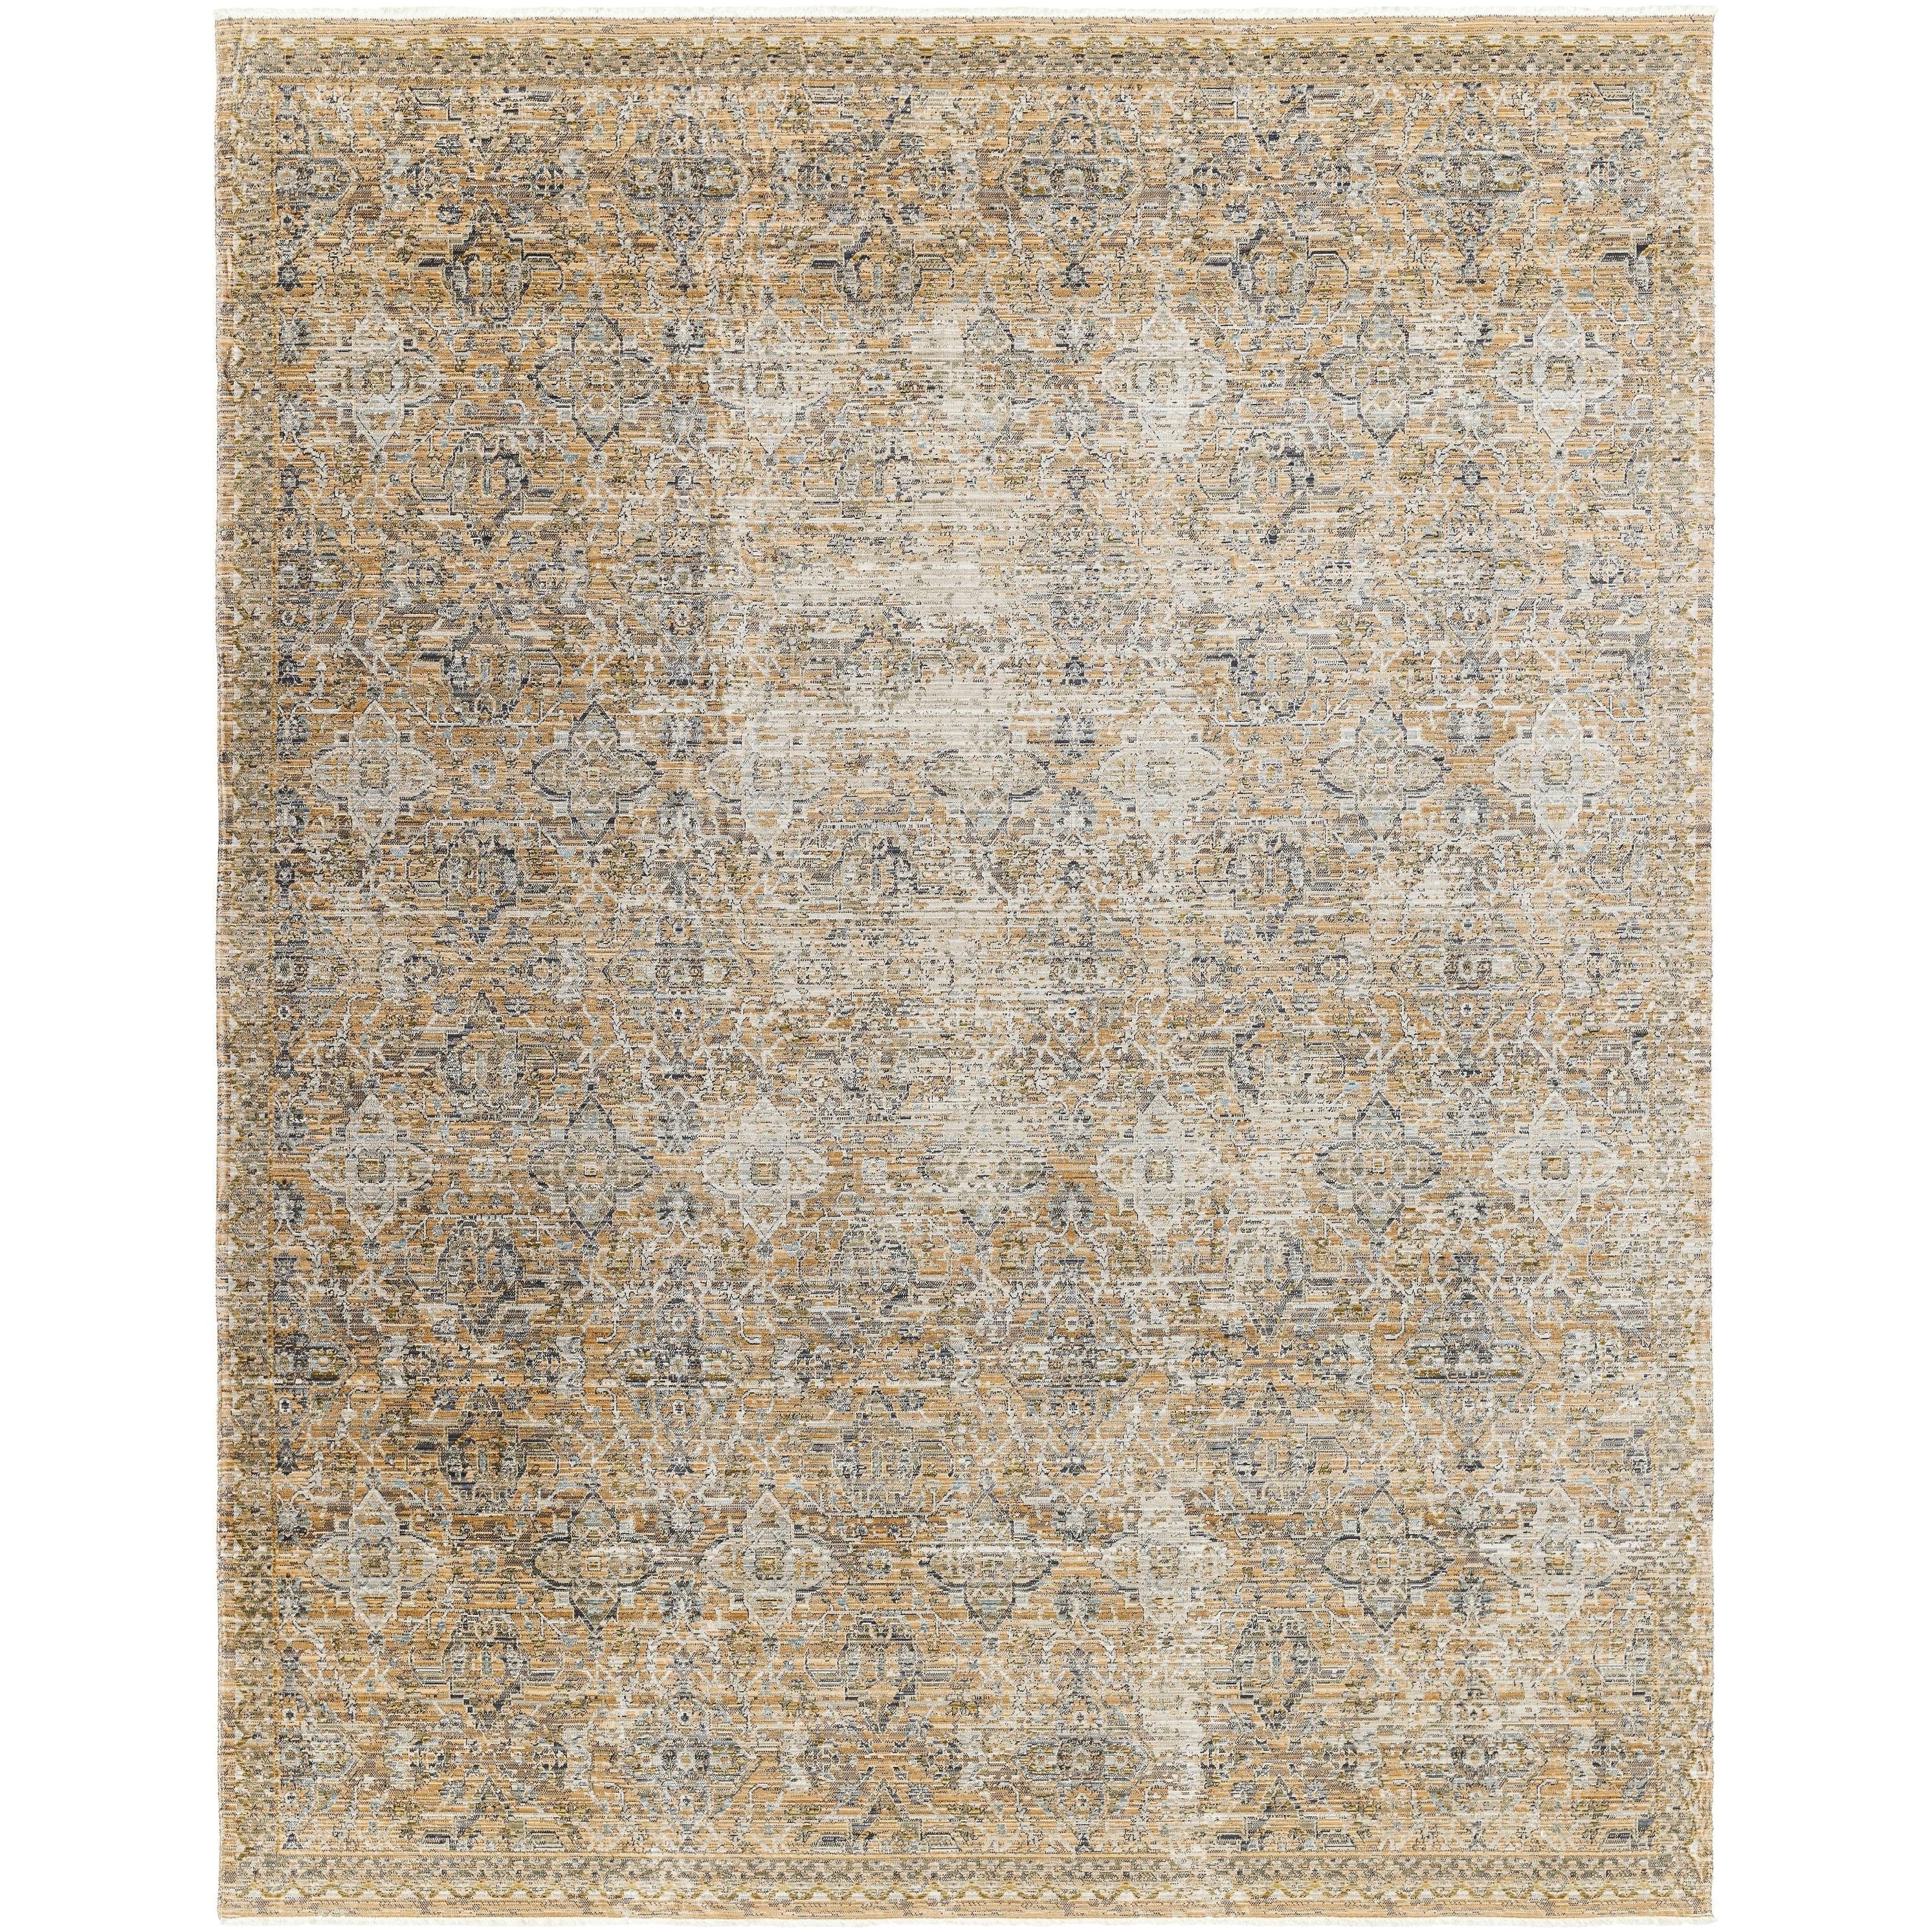 The Margaret area rug is the perfect addition to any room in your home. Designed as a special collaboration between Surya and Becki Owens, this stunning piece is sure to be the center of attention wherever it's placed. Its classic design features a distressed look of beautiful warm taupes and subtle touches of navy and gray. Amethyst Home provides interior design, new home construction design consulting, vintage area rugs, and lighting in the Houston metro area.